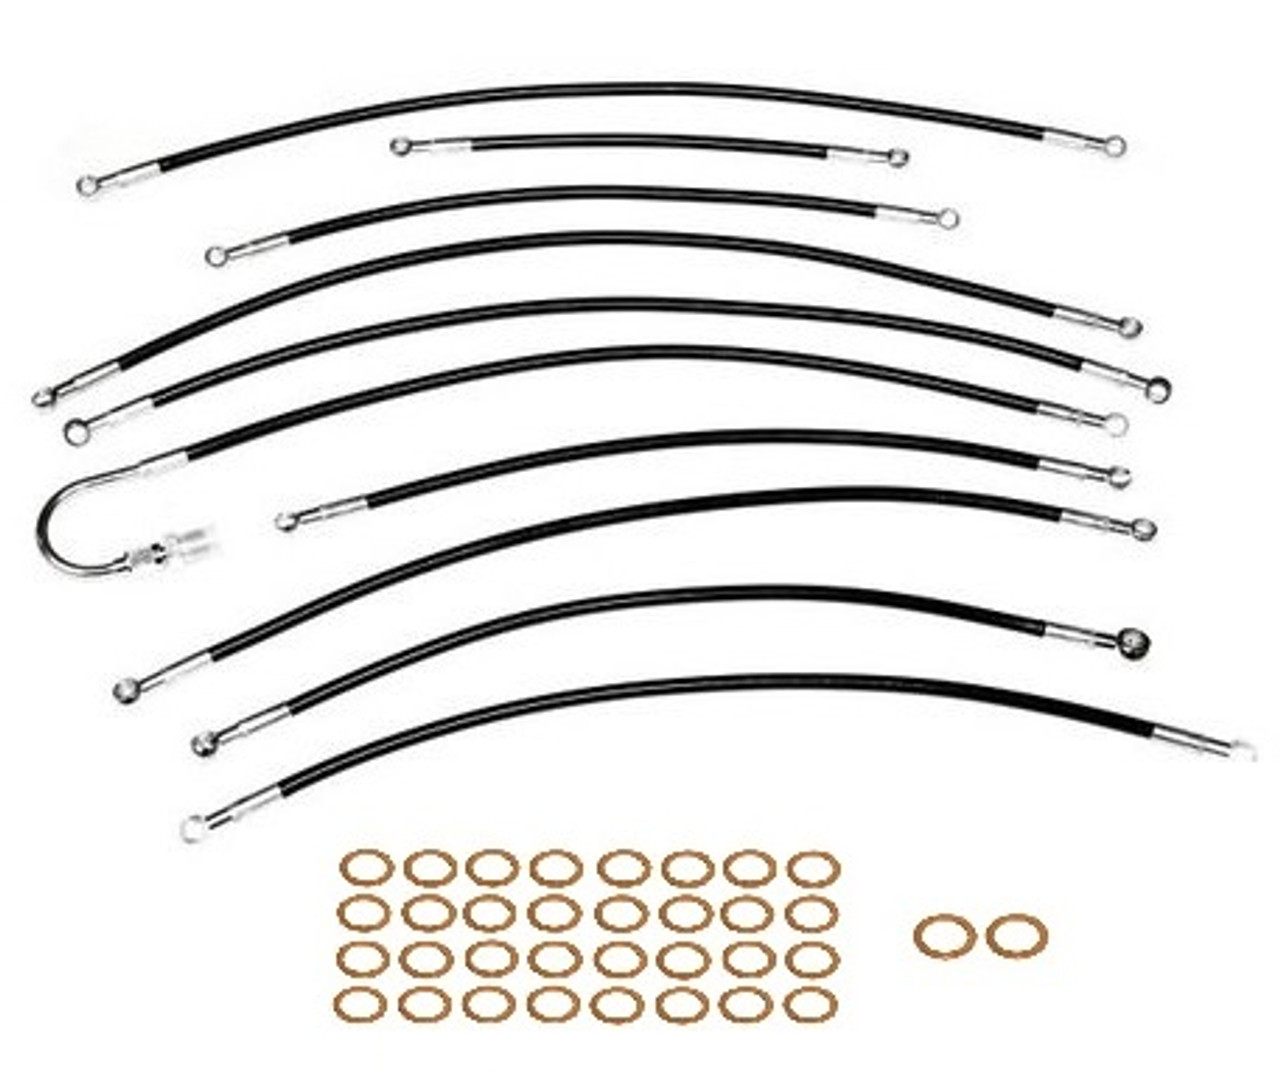 Clear Coated Stainless Braided Brake Hoses / Lines (set) - Pièces DeLorean  Suisse